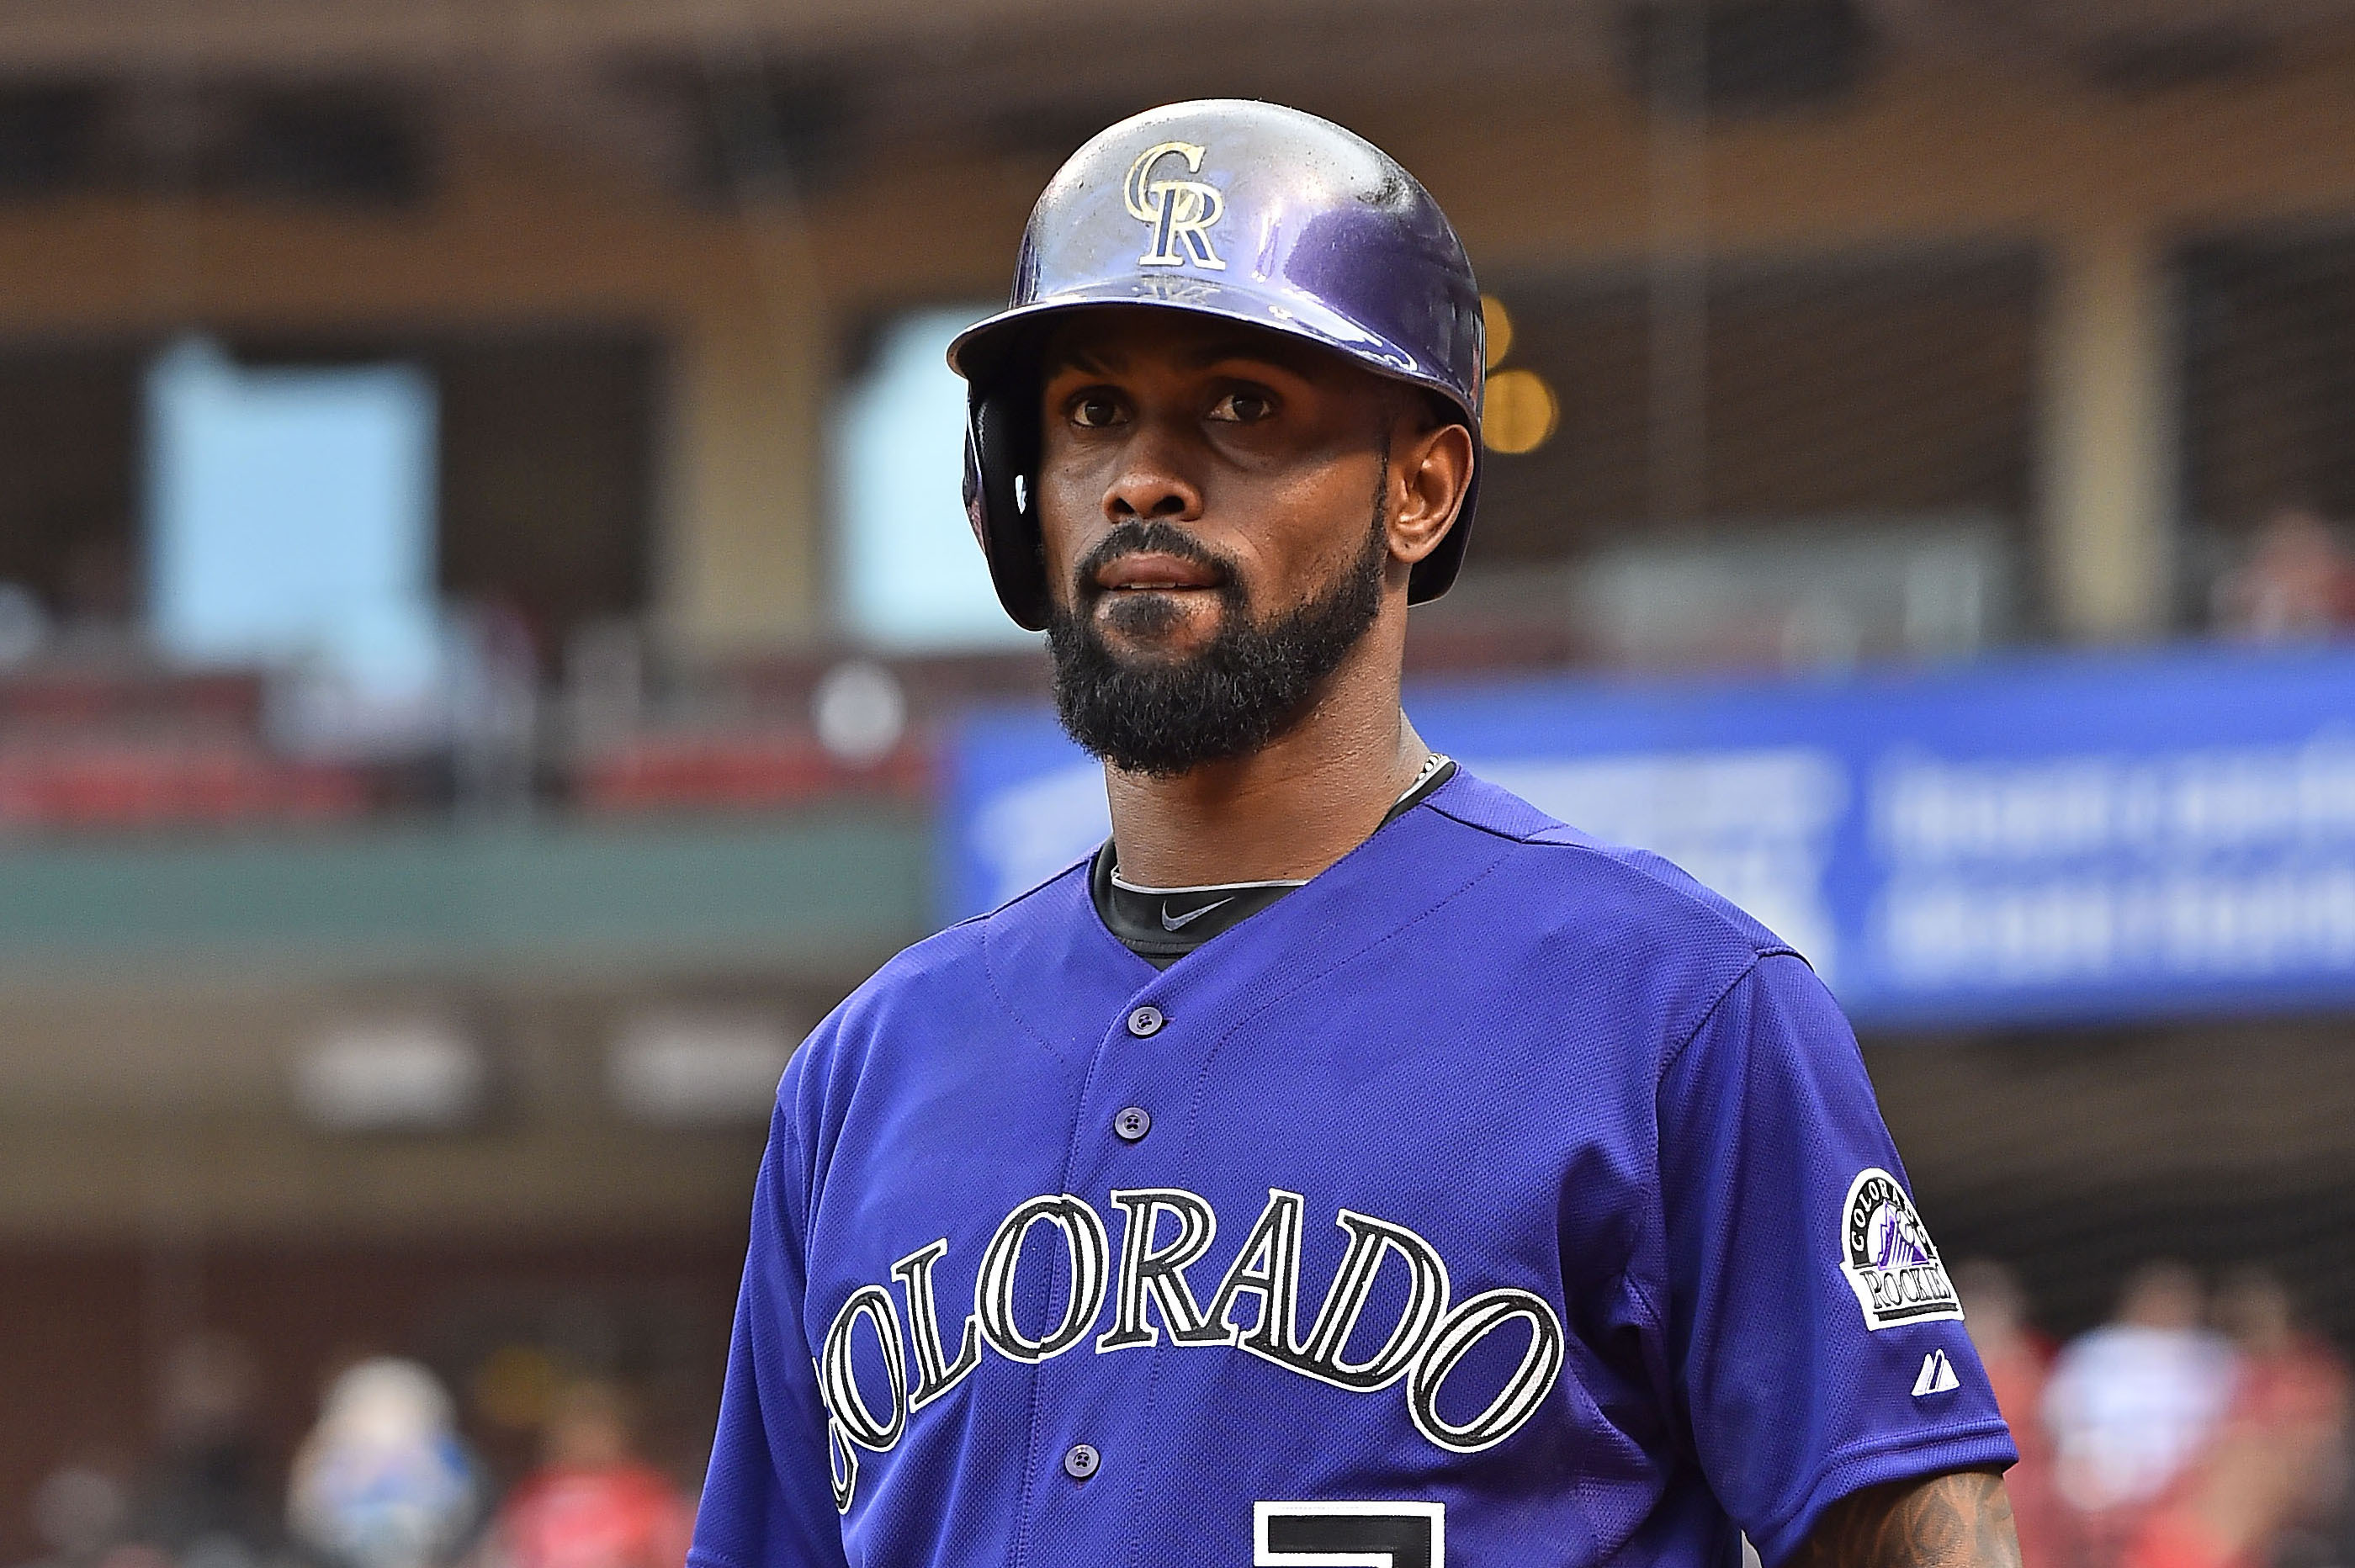 Jose Reyes' domestic violence case shows MLB policy has